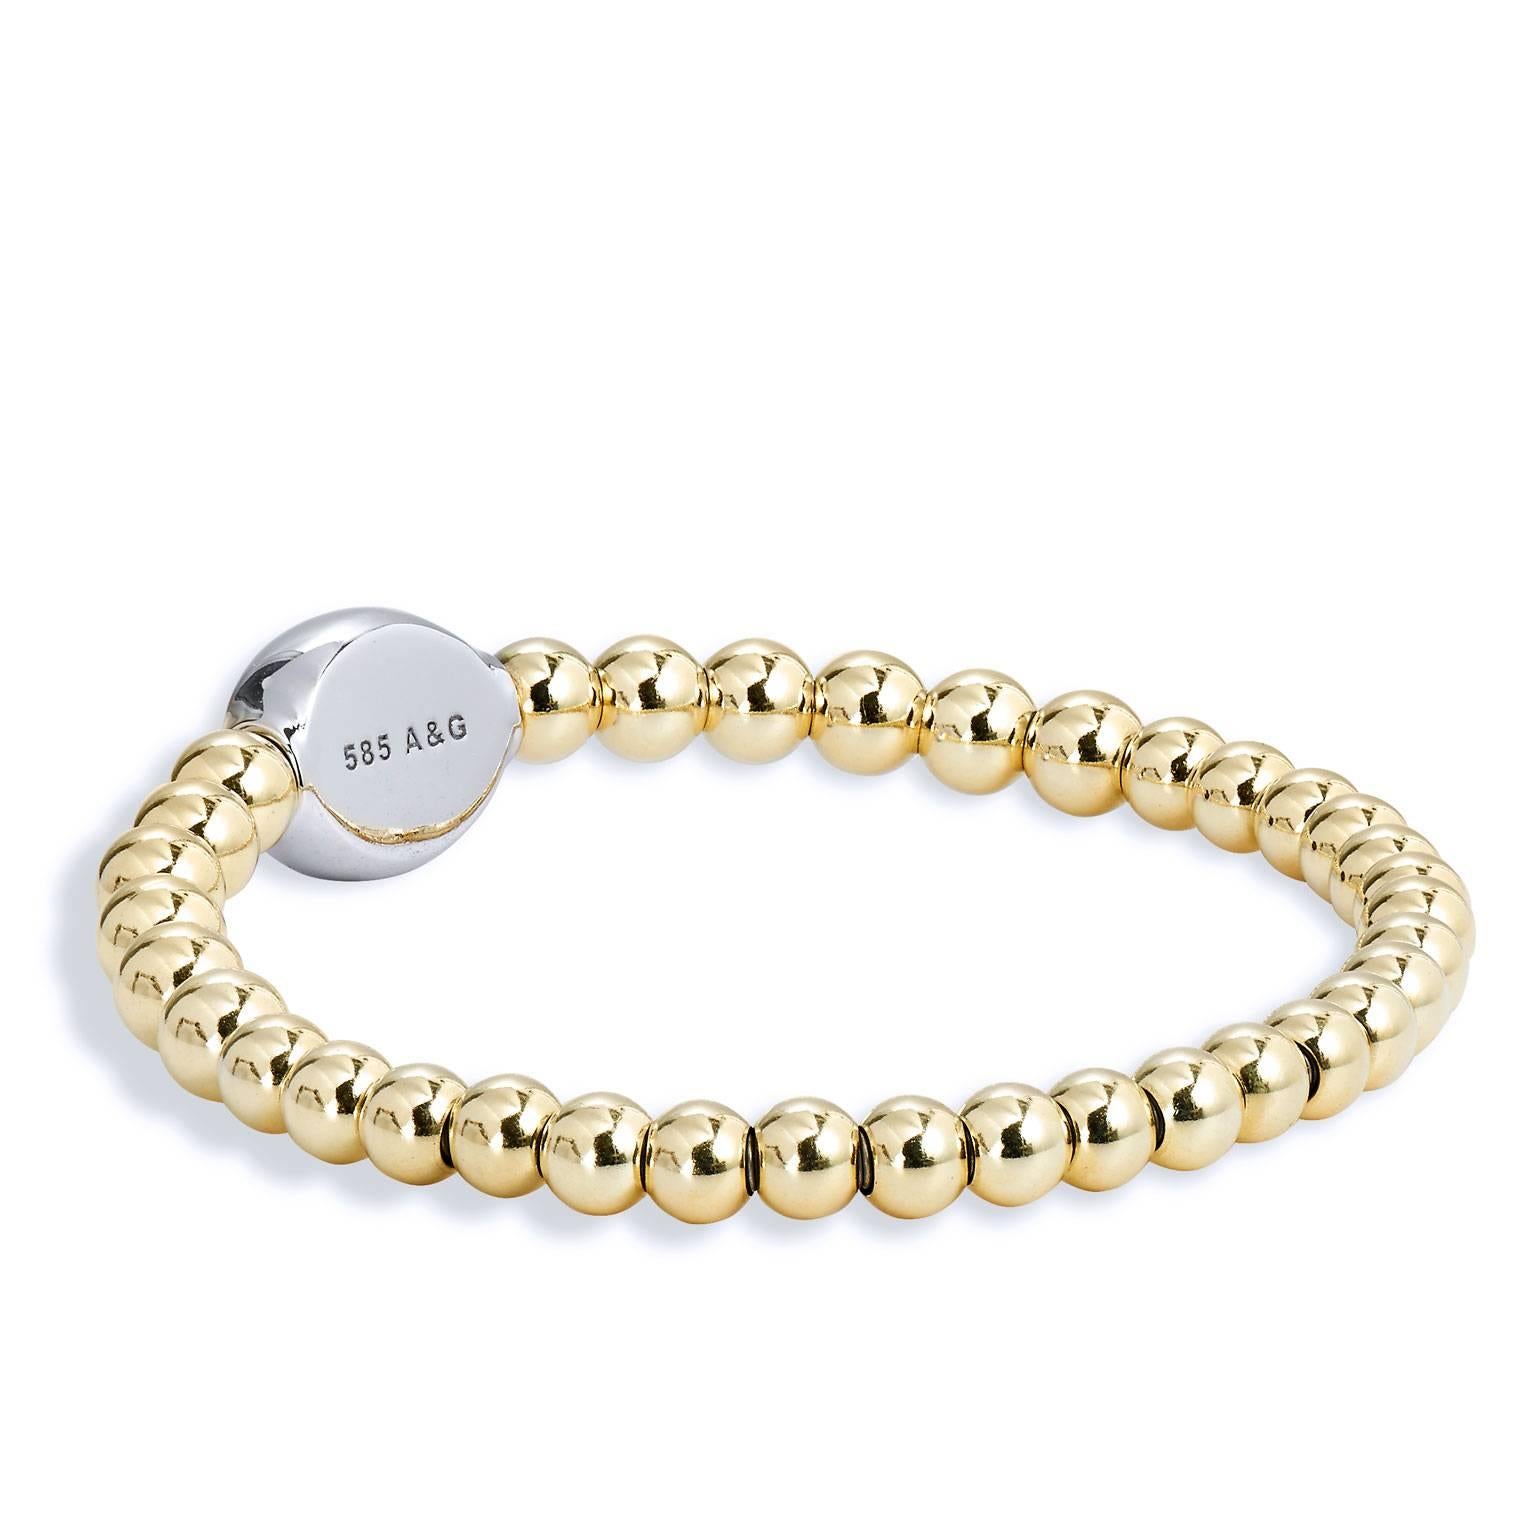 Bracelet with 14 karat yellow gold beads (5 mm to 5.5 mm bead size), white gold oval embellishment with 0.57 carat of diamond pave set and surgical steel insert.